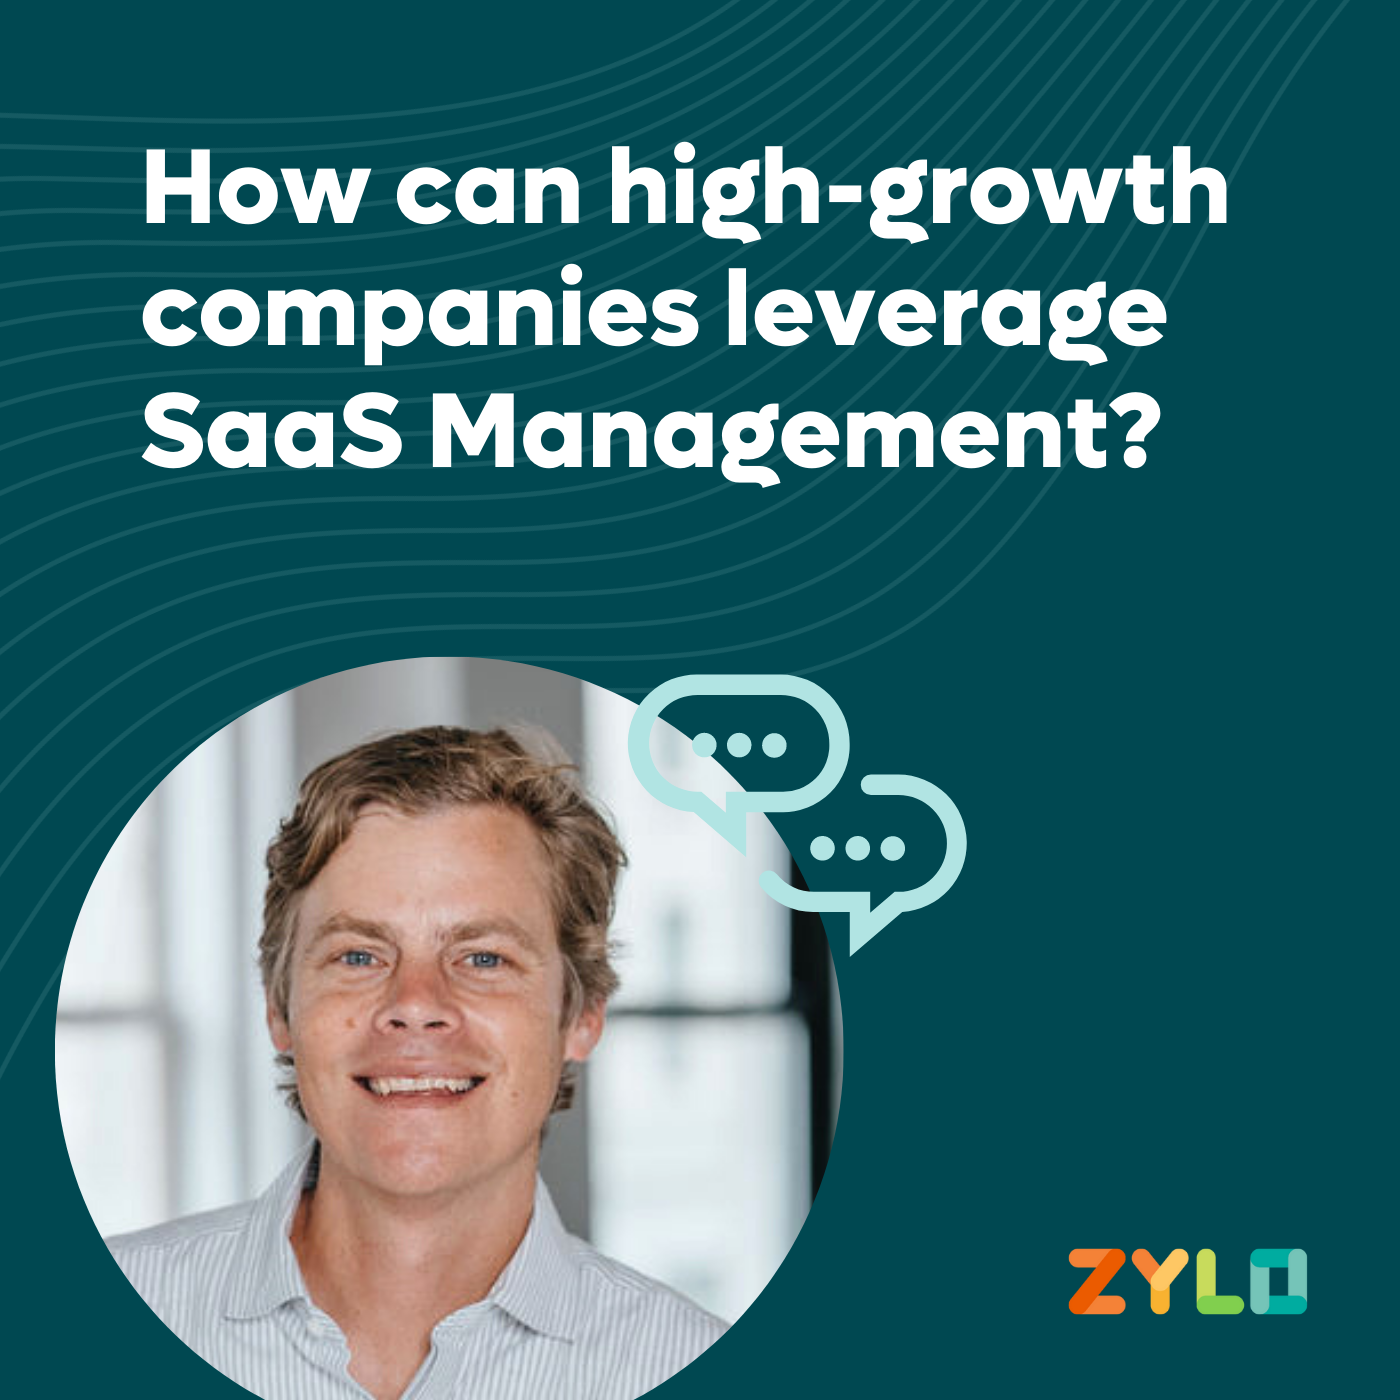 How can high-growth companies leverage SaaS Management?